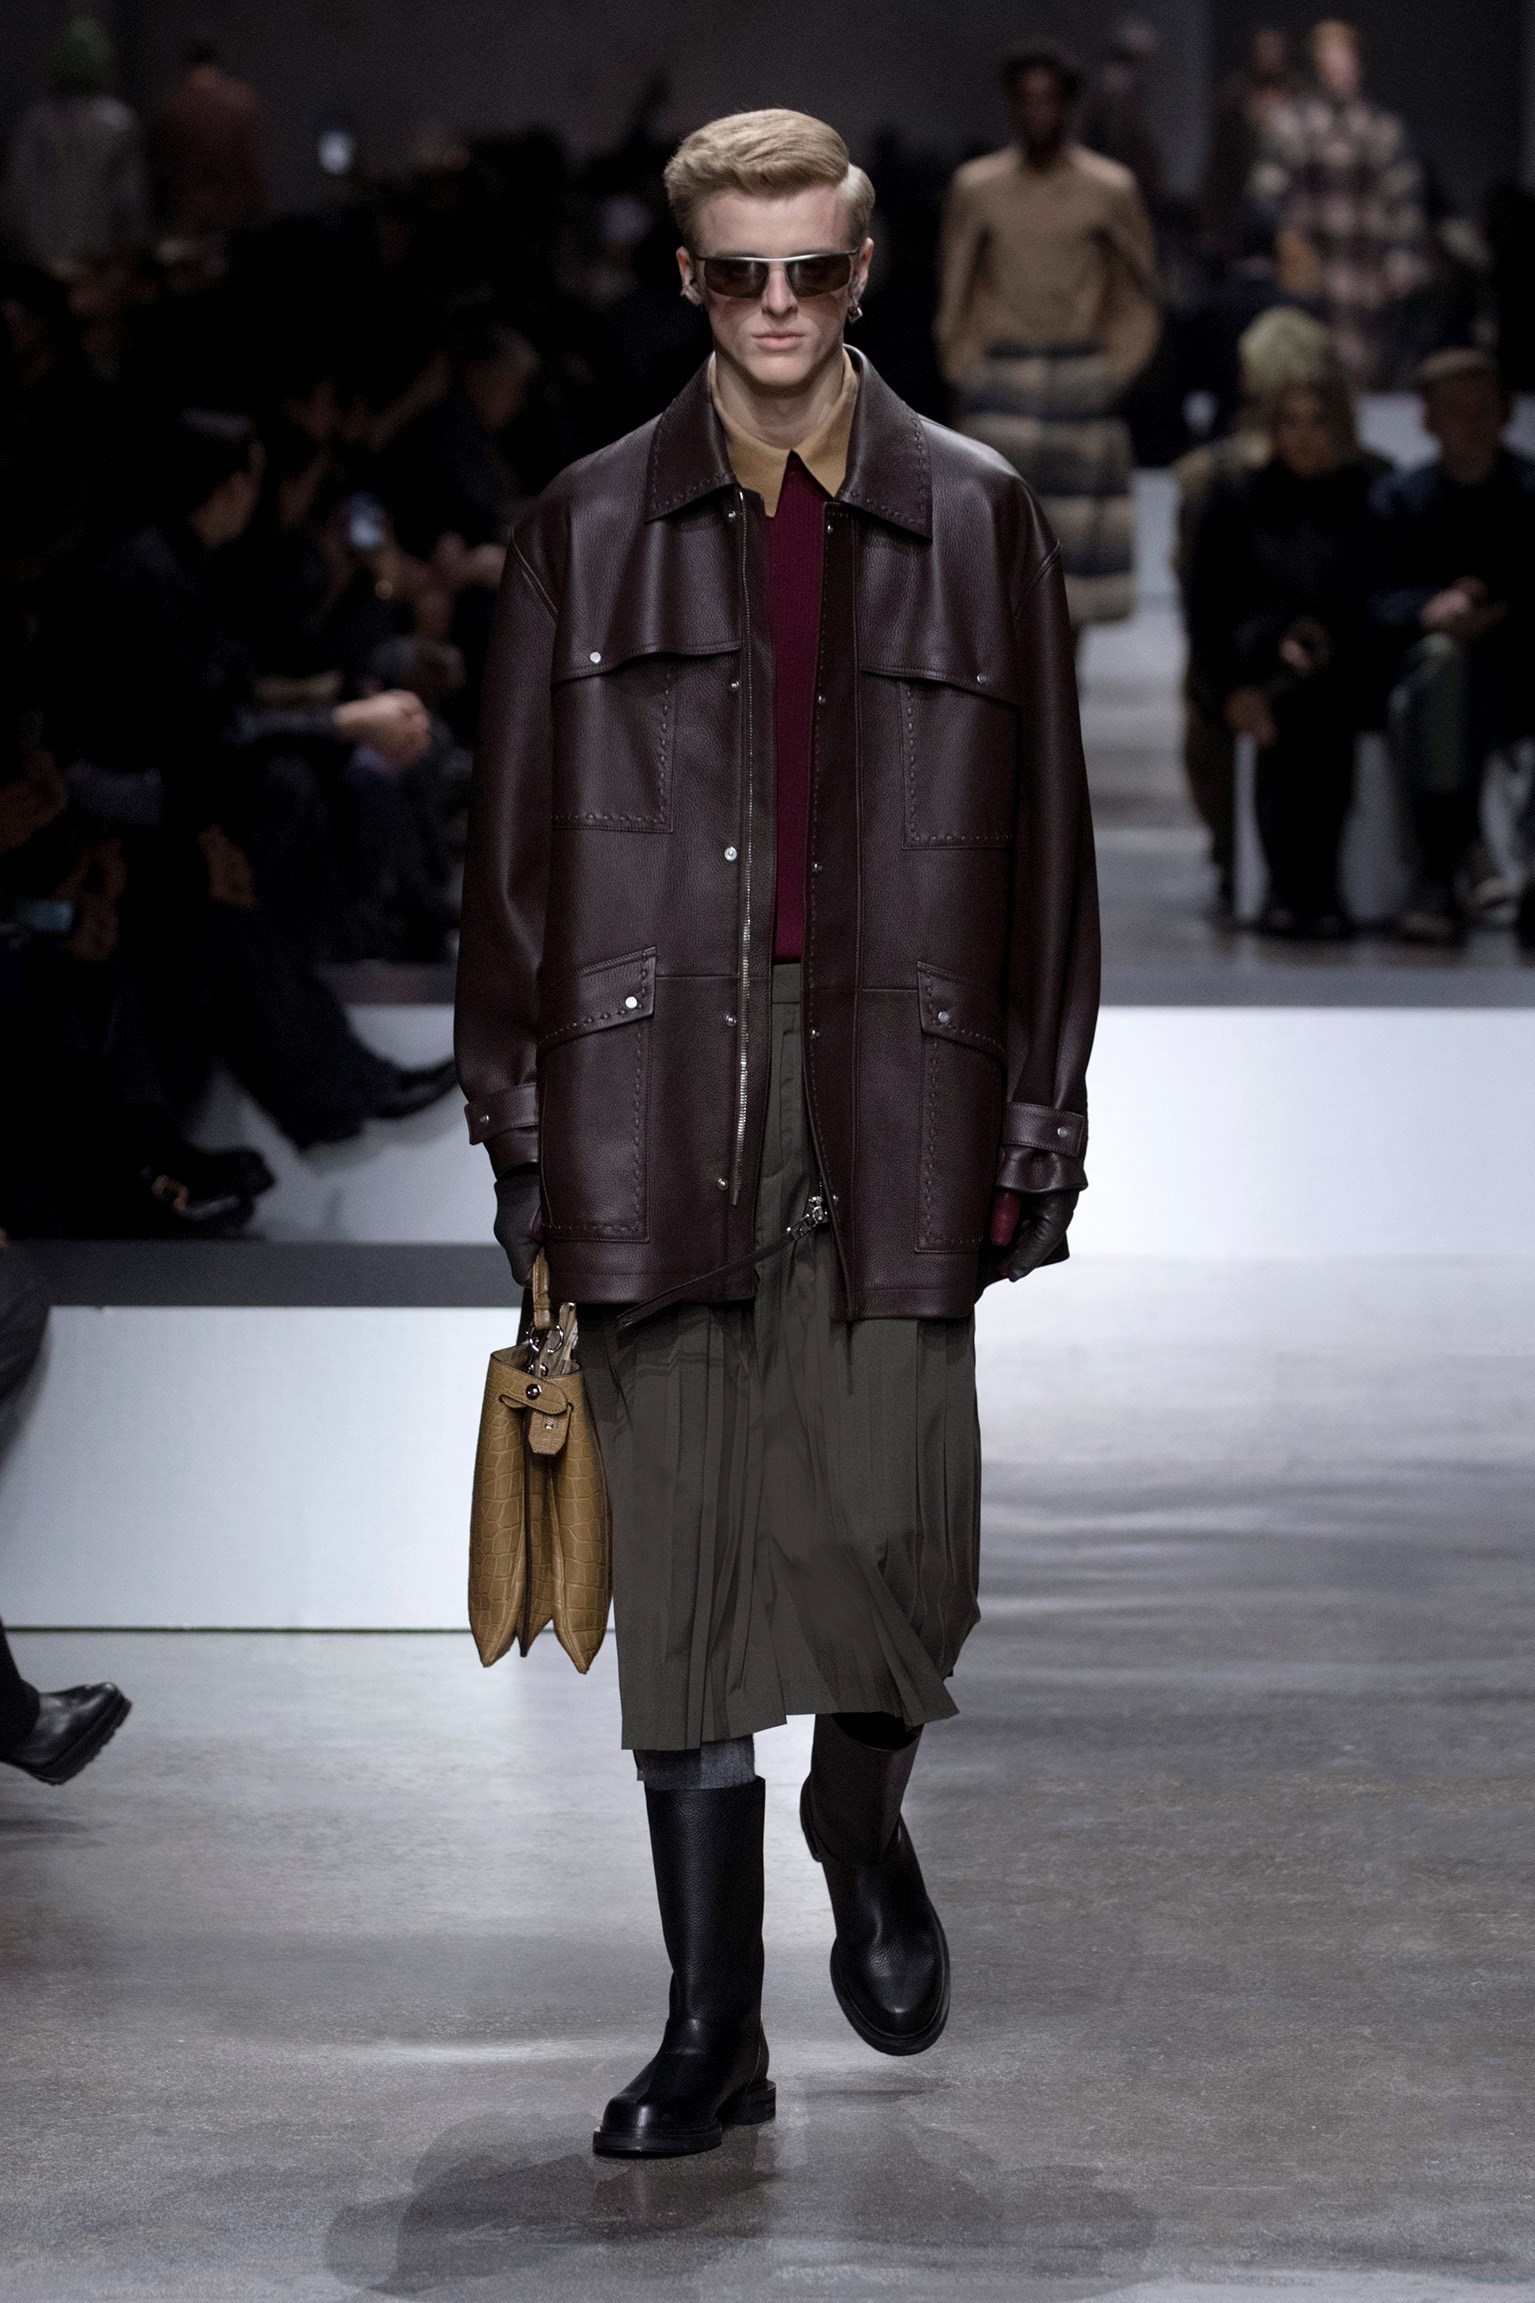 Fendi’s Menswear Collection Riffs on Royalty | AnOther